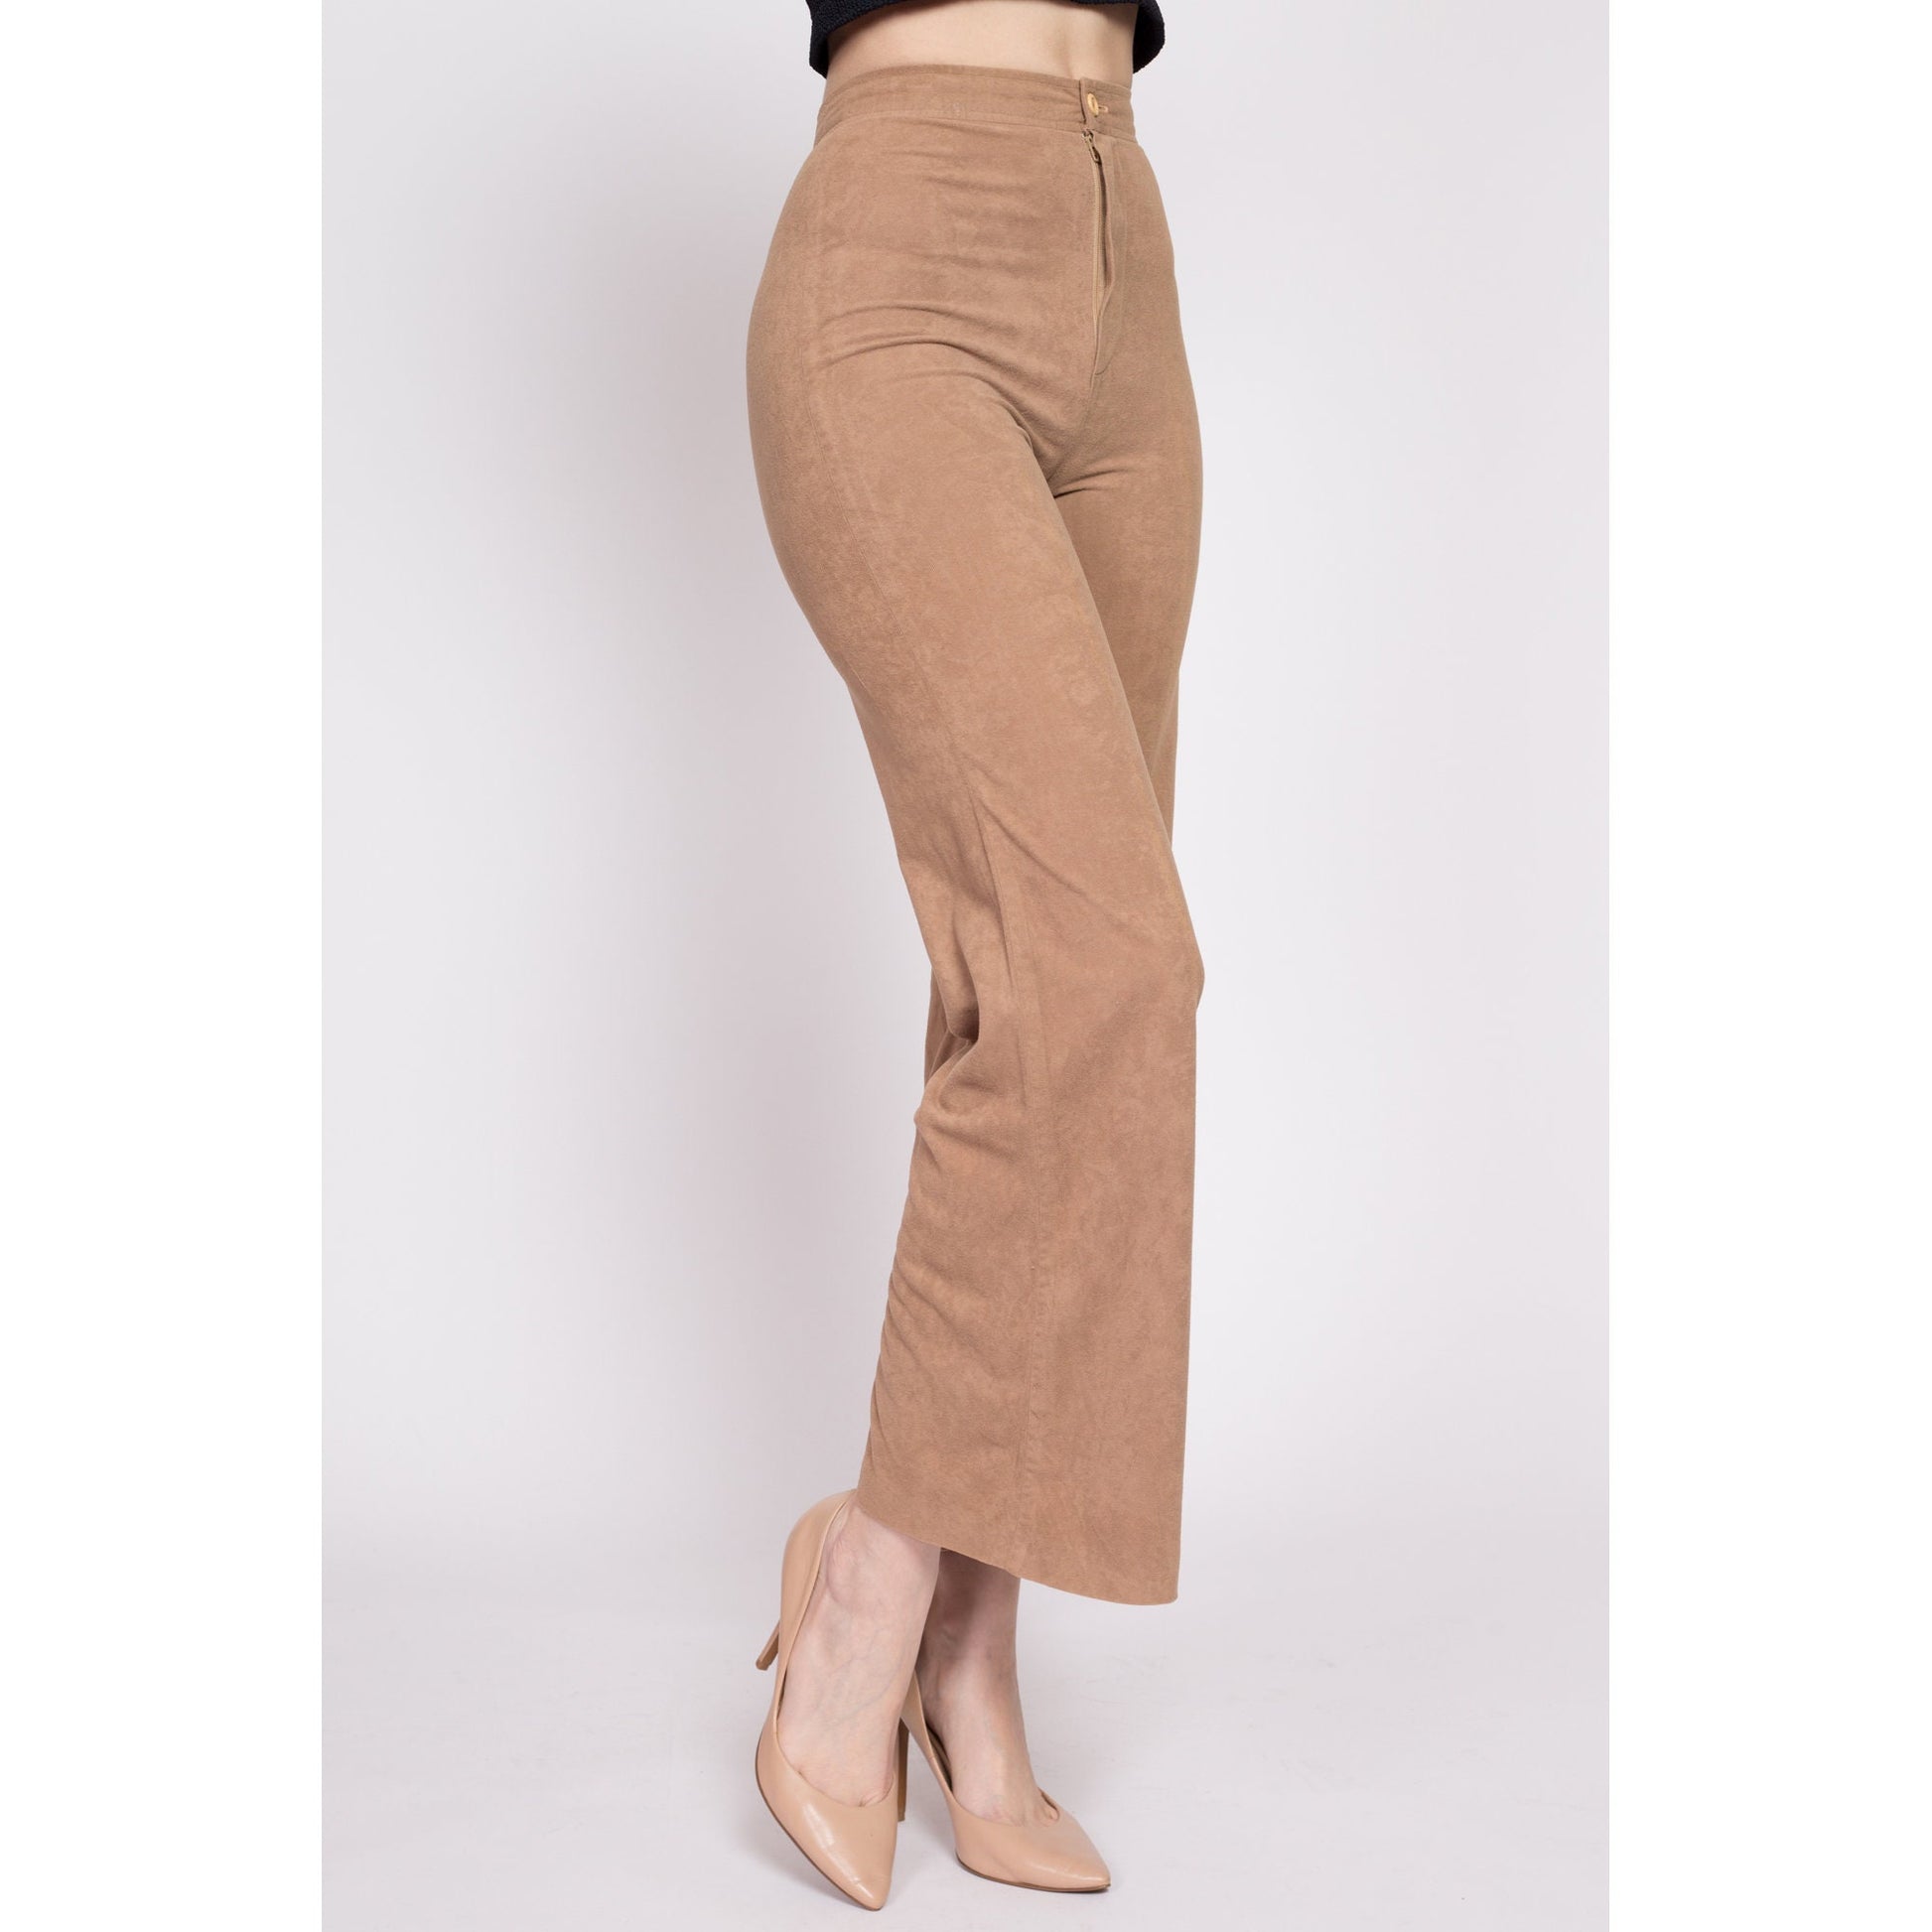 70s Tan Ultrasuede High Waisted Pants - Extra Small, 23.5" | Vintage Flared Light Brown Retro Trousers